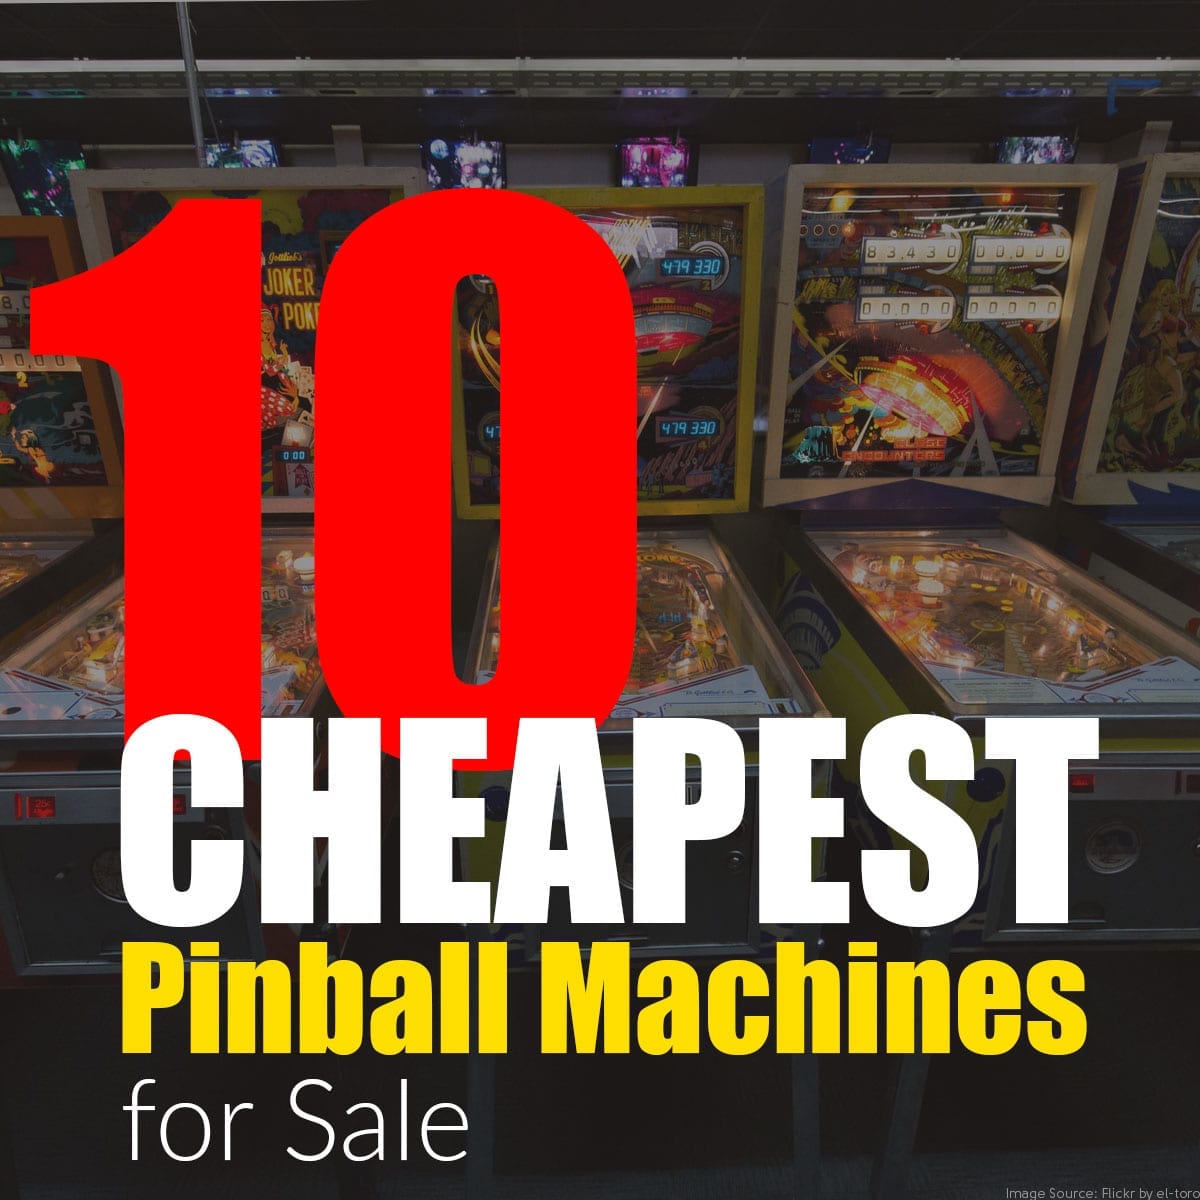 10 Cheapest Pinball Machines for Sale